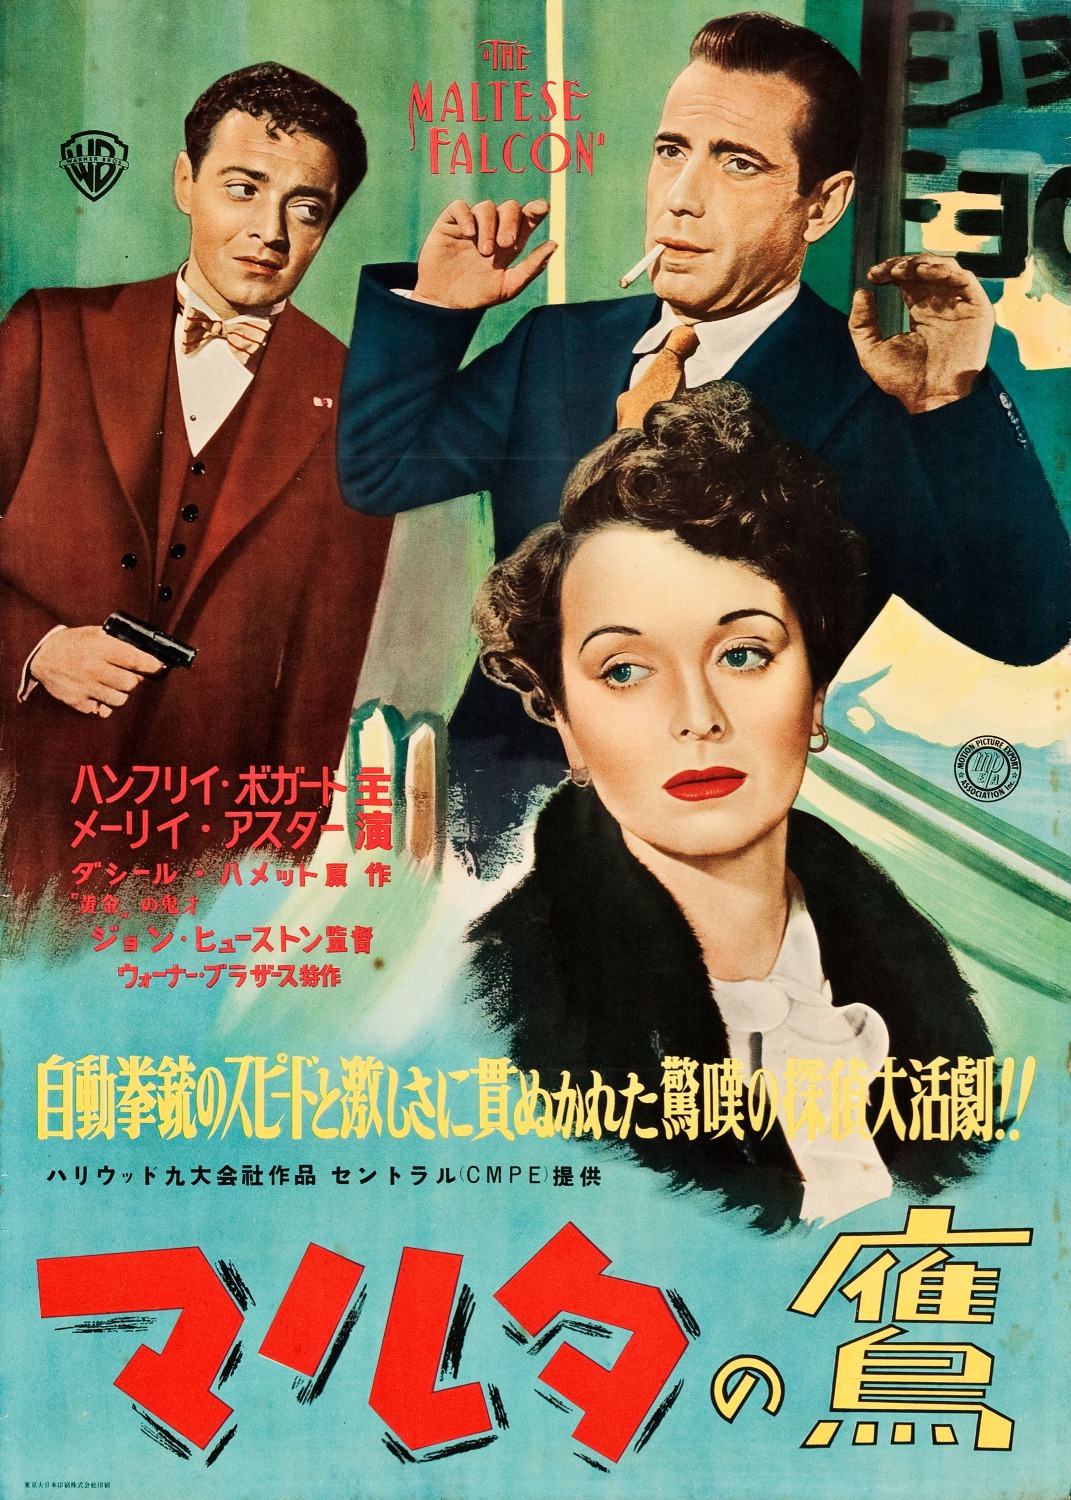 Extra Large Movie Poster Image for The Maltese Falcon (#10 of 10)